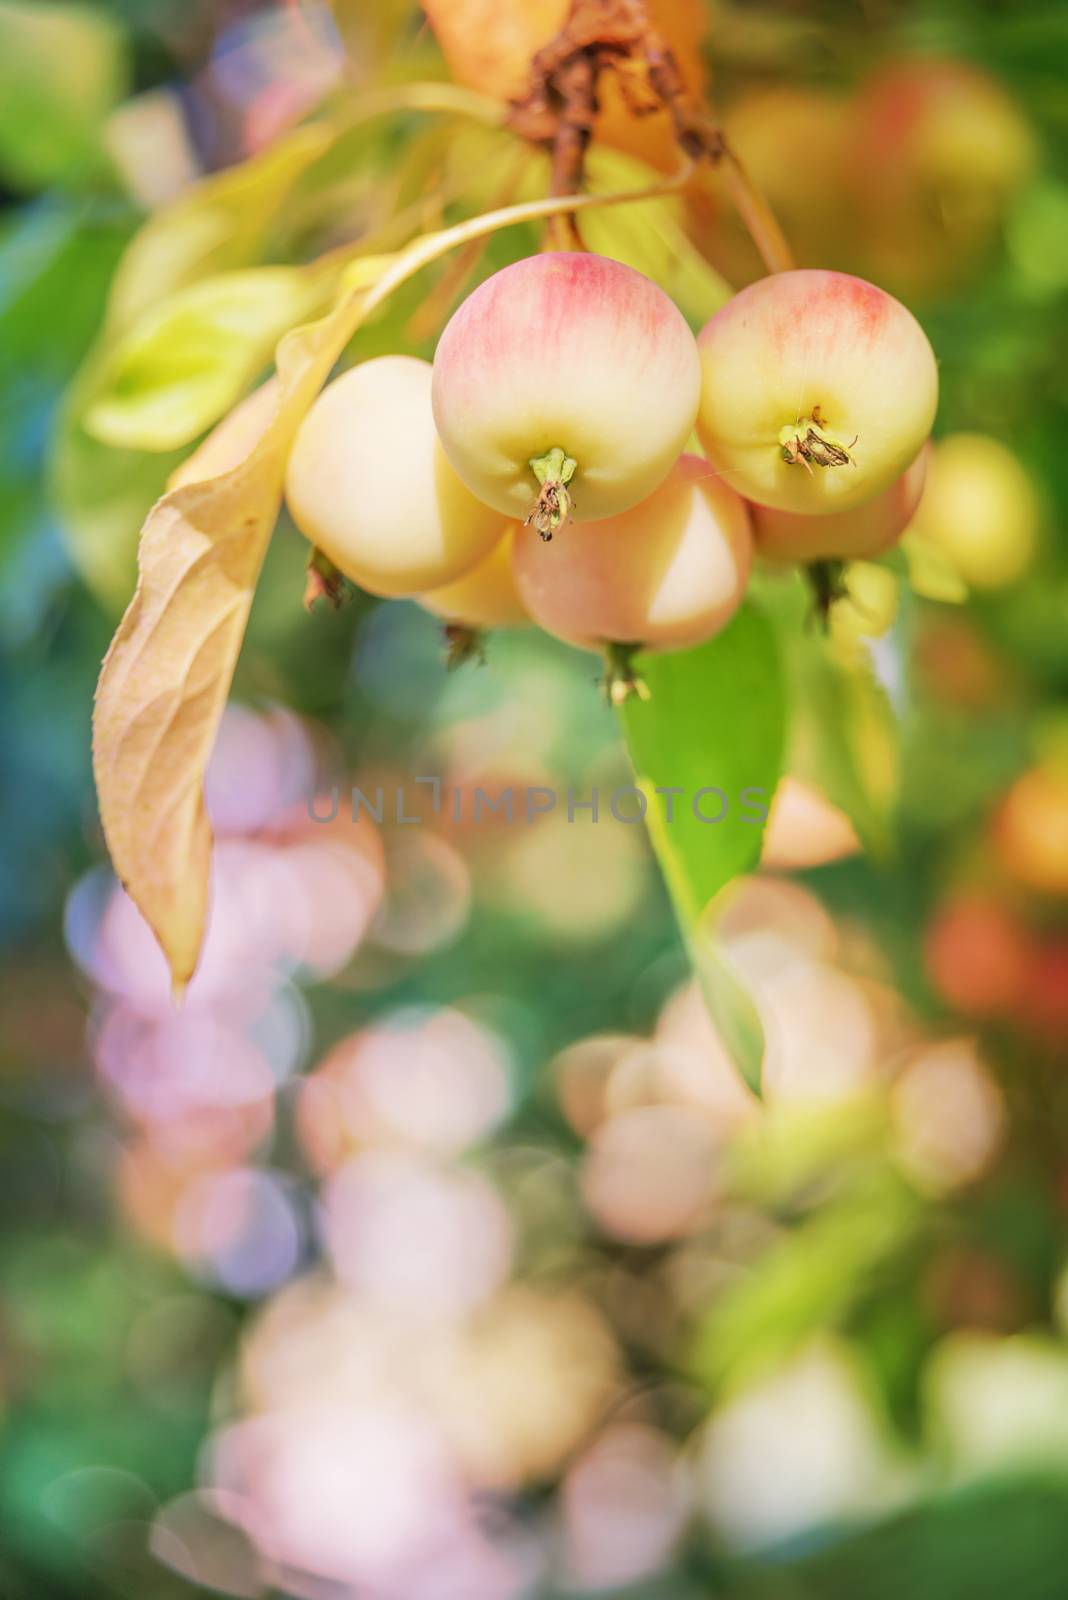 Beautiful natural background with apples on a branch in a summer garden